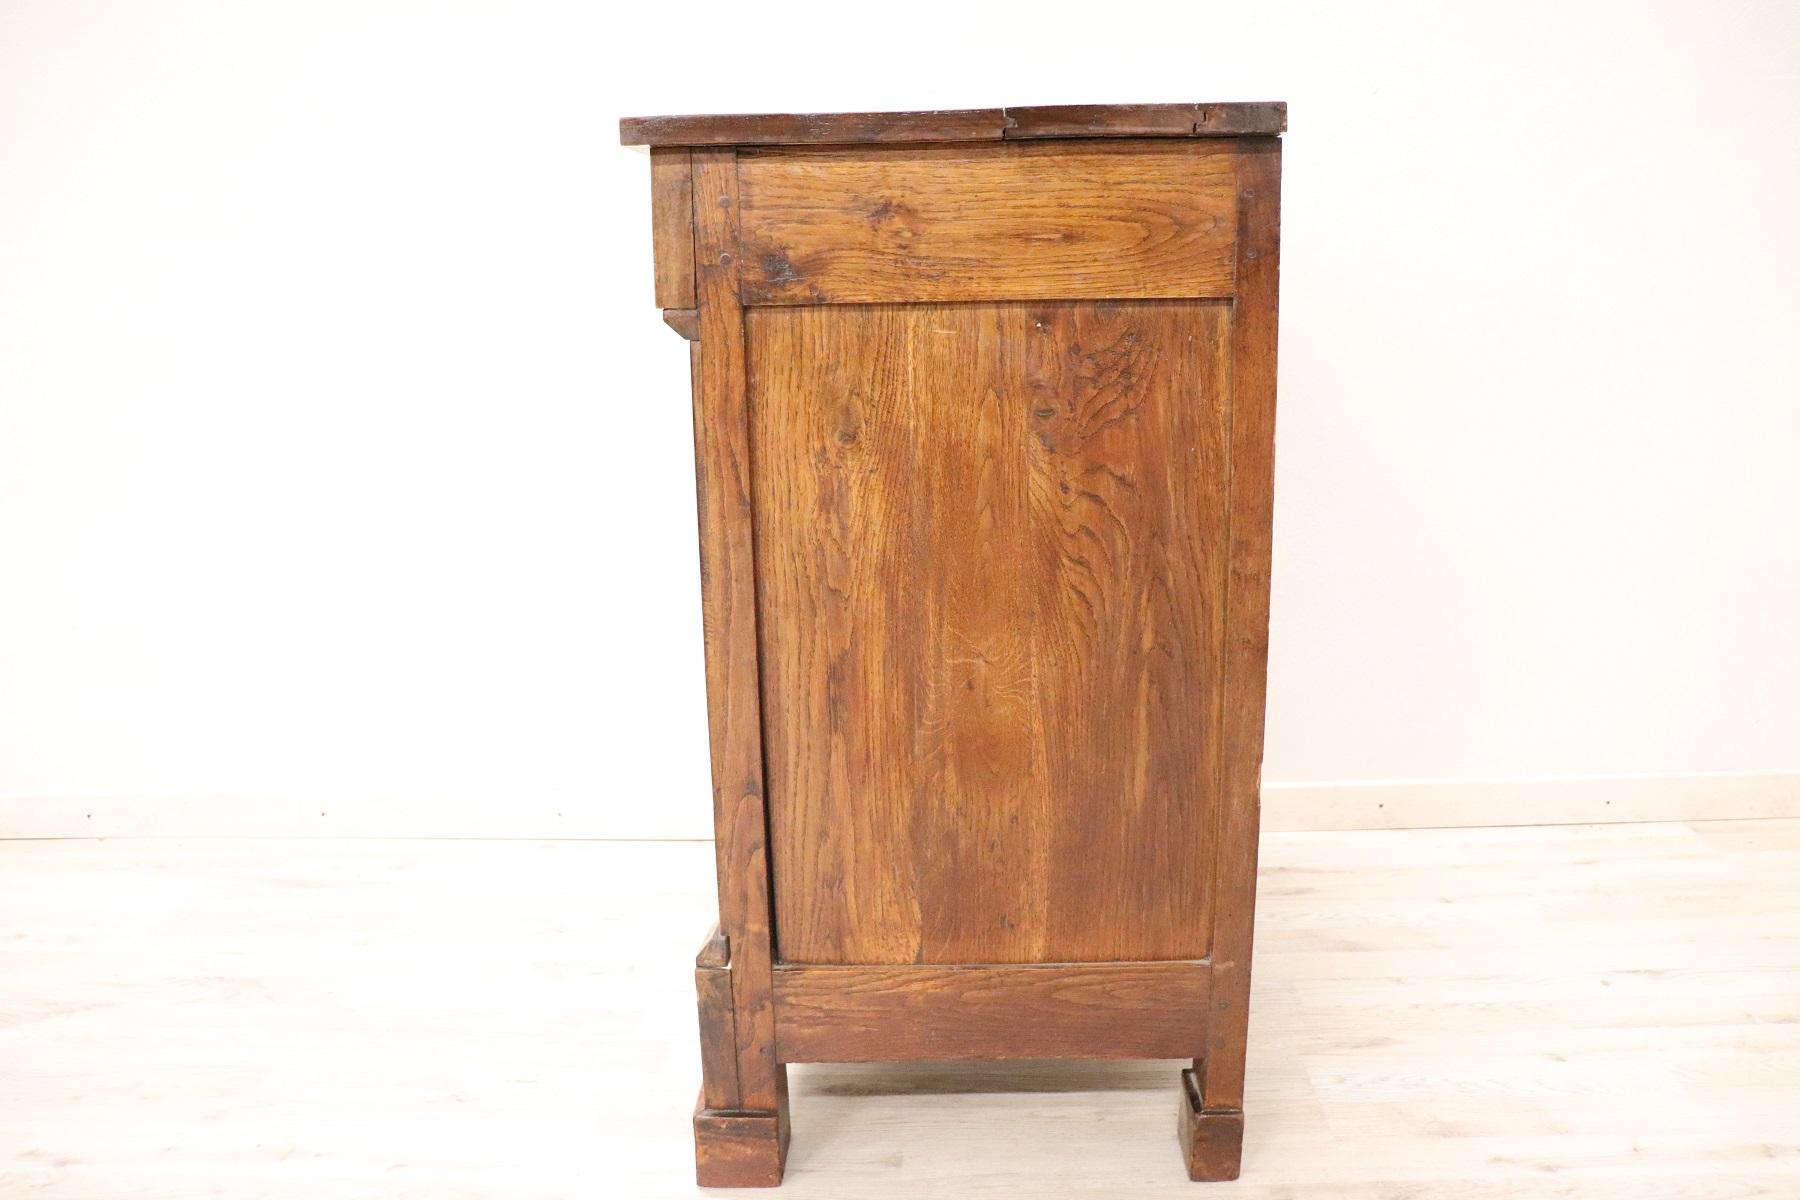 Mid-19th Century 19th Century Italian Chestnut Wood Small Rustic Sideboard, Buffet or Credenza